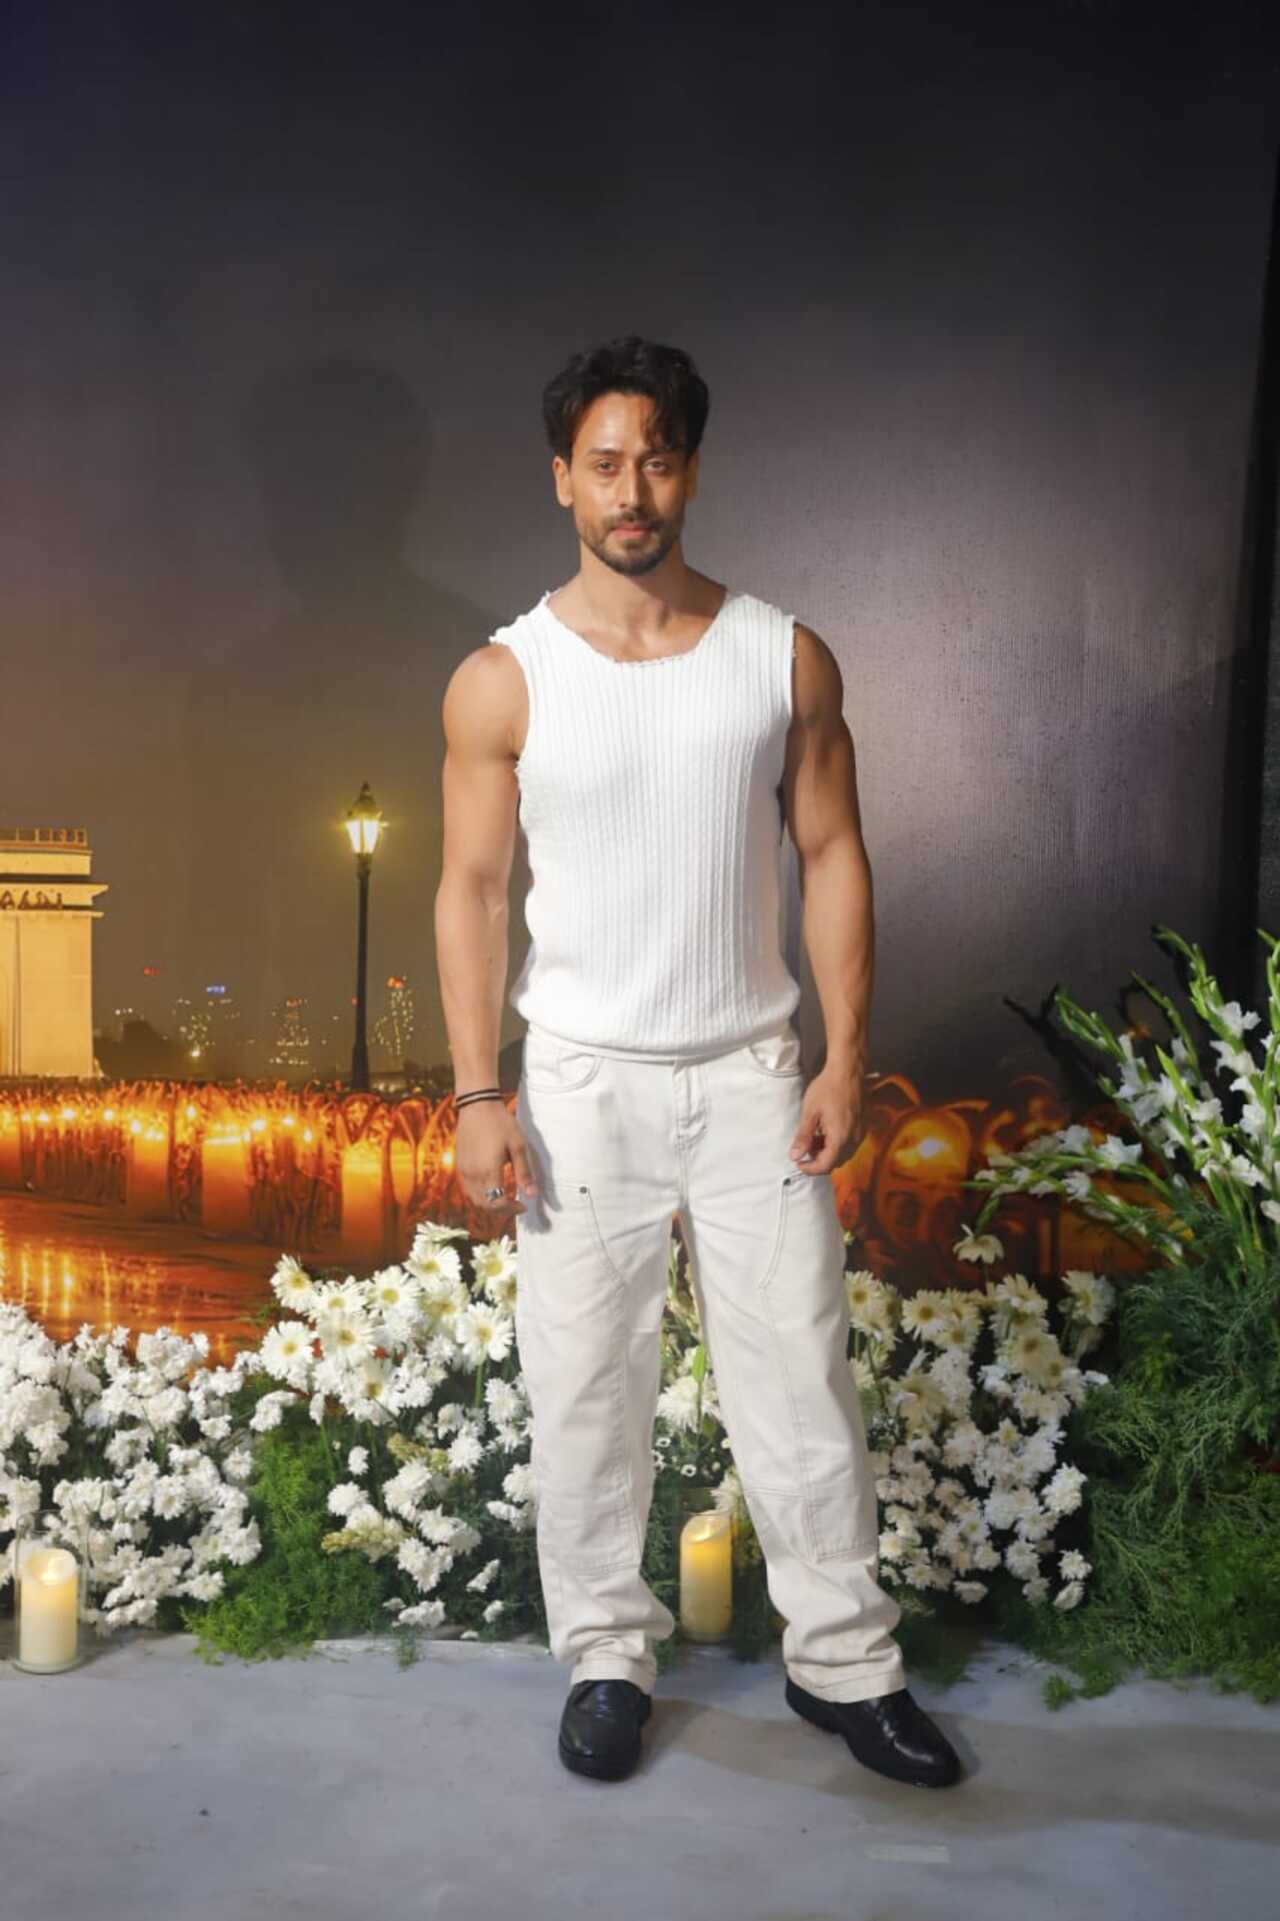 Tiger Shroff performed at the event